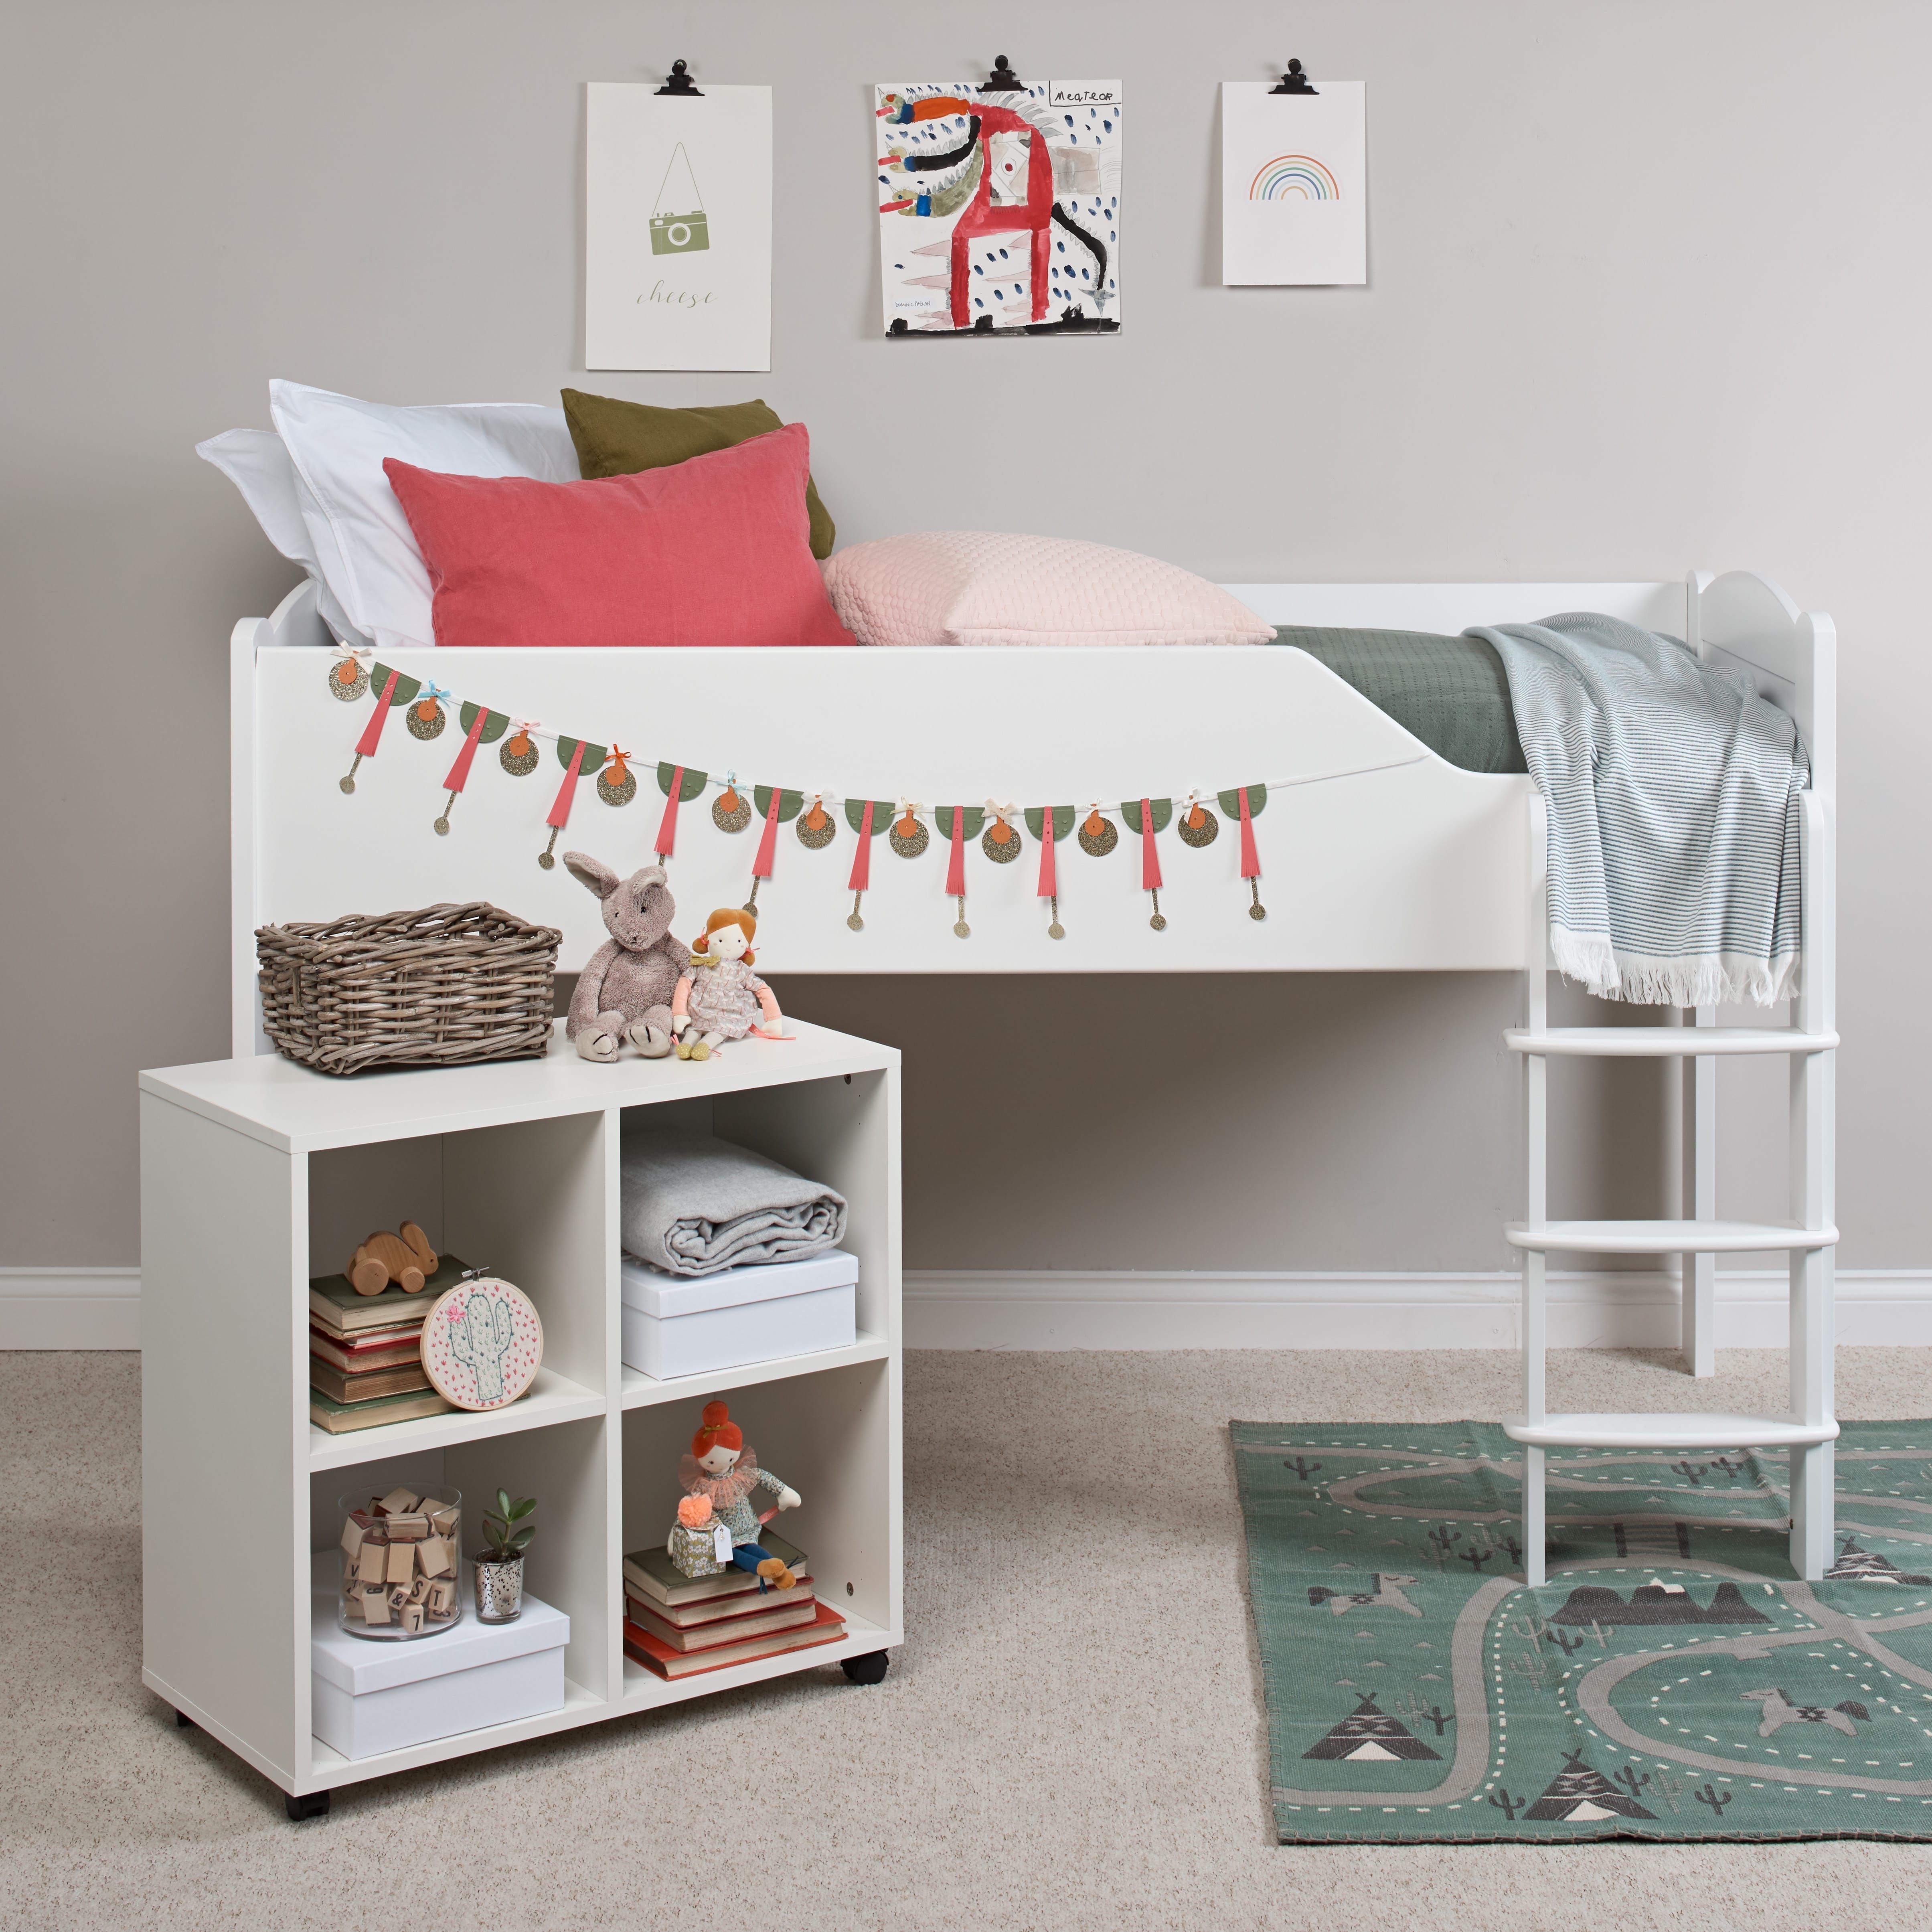 The White Mid Sleeper Bed (RIGHT)